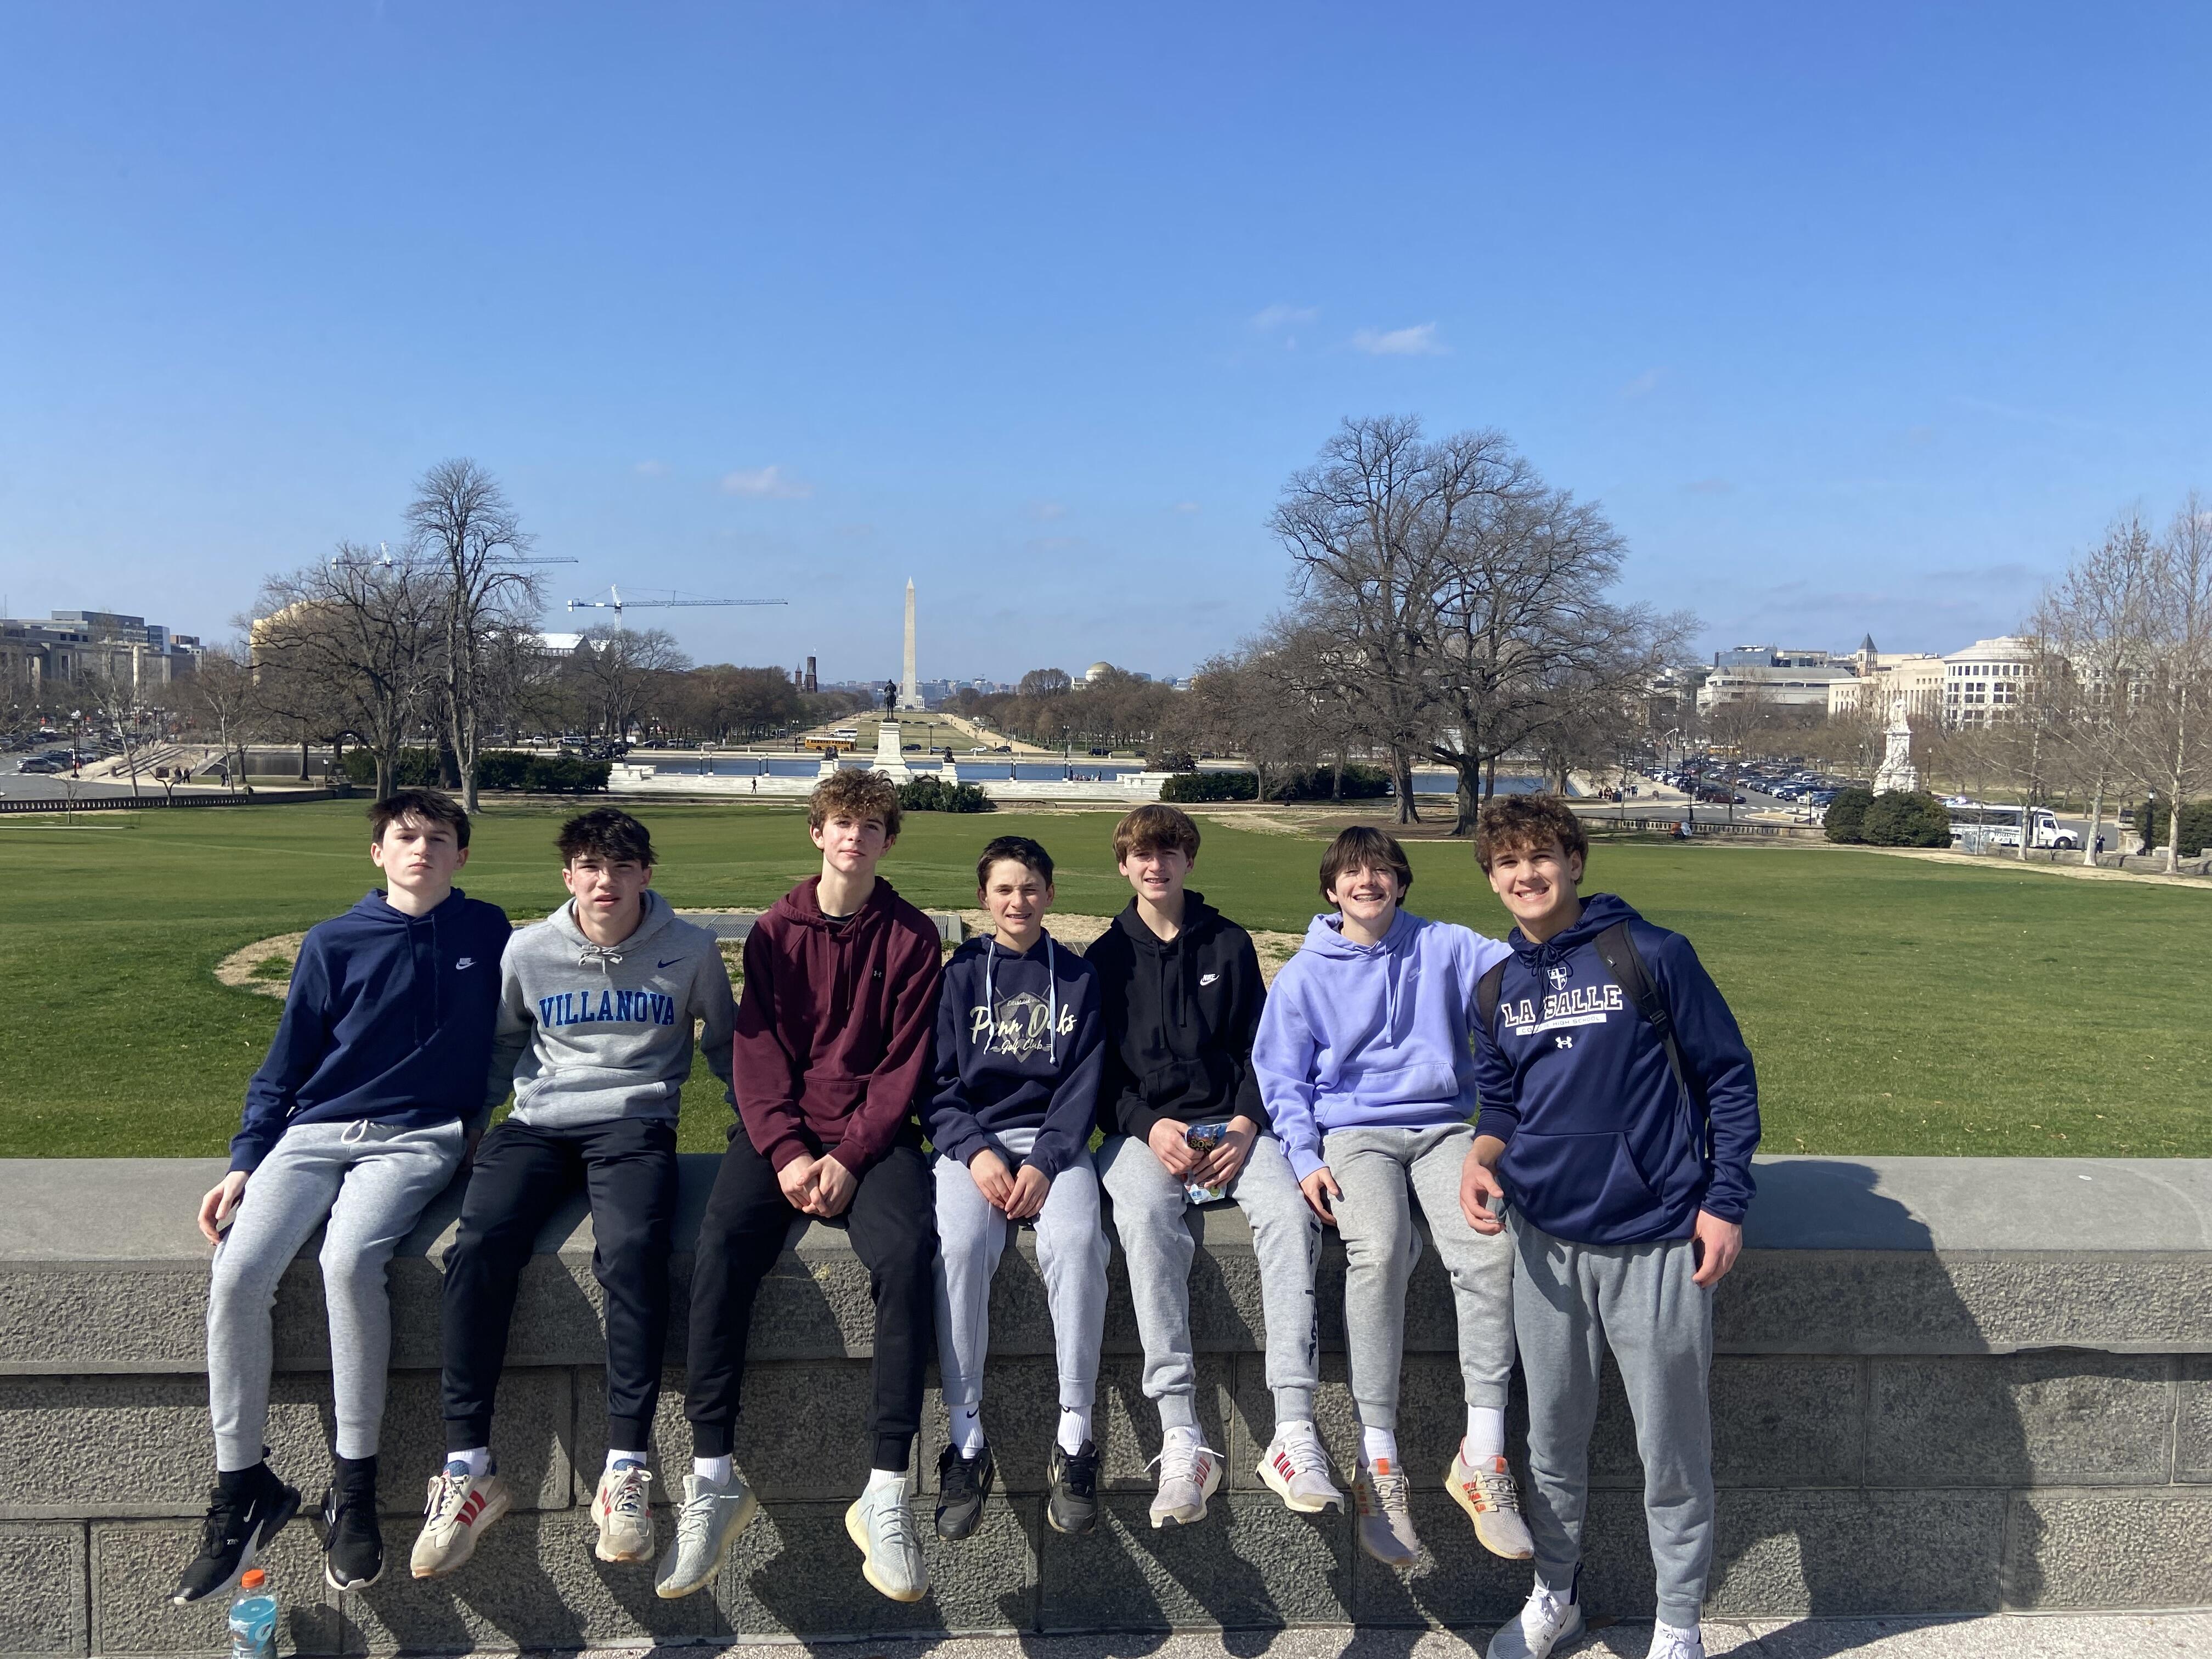 MS- Students in front of Washington Monument